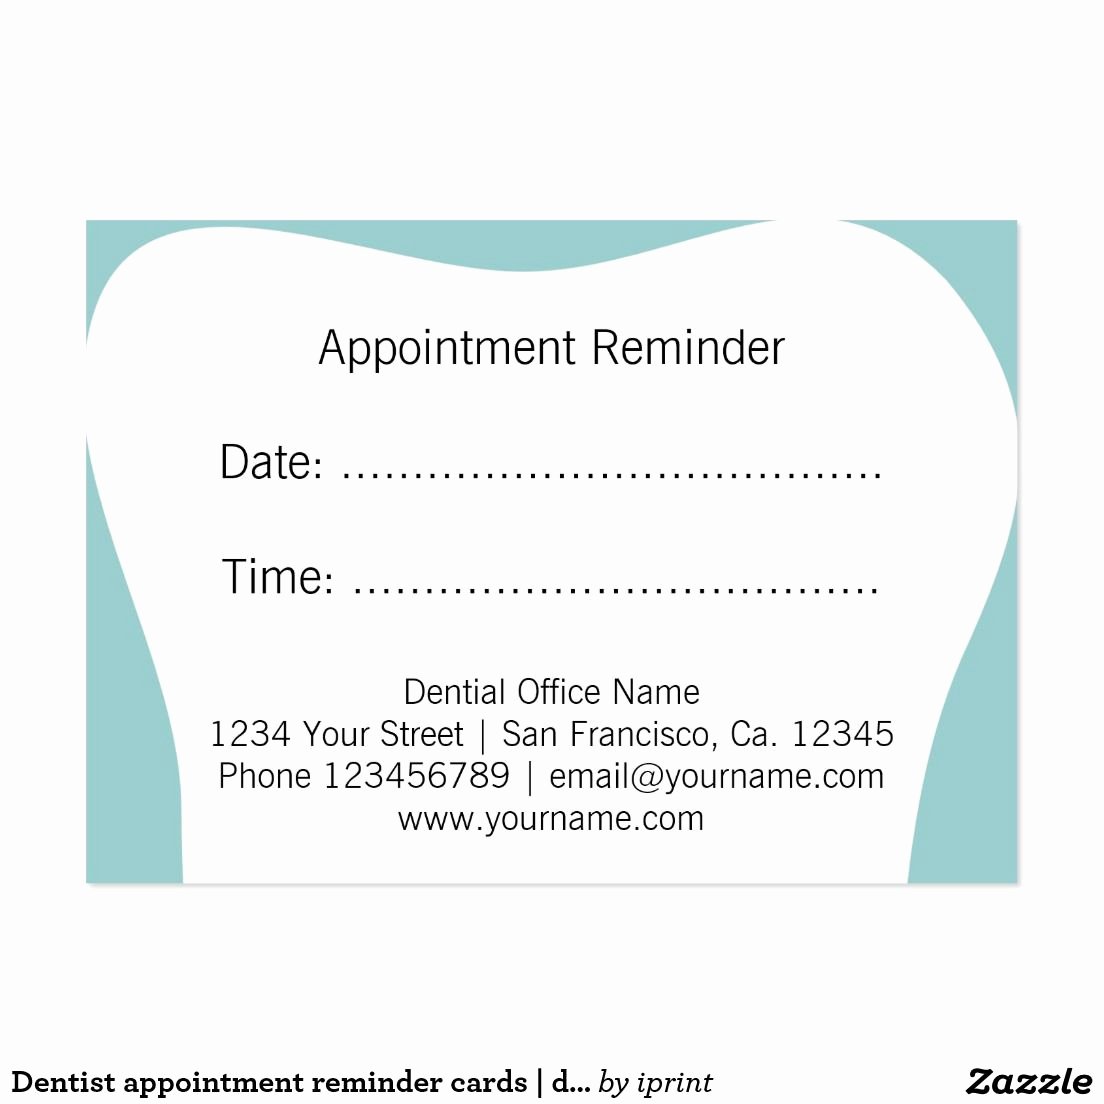 free printable appointment reminder cards inspirational dentist appointment reminder cards of free printable appointment reminder cards